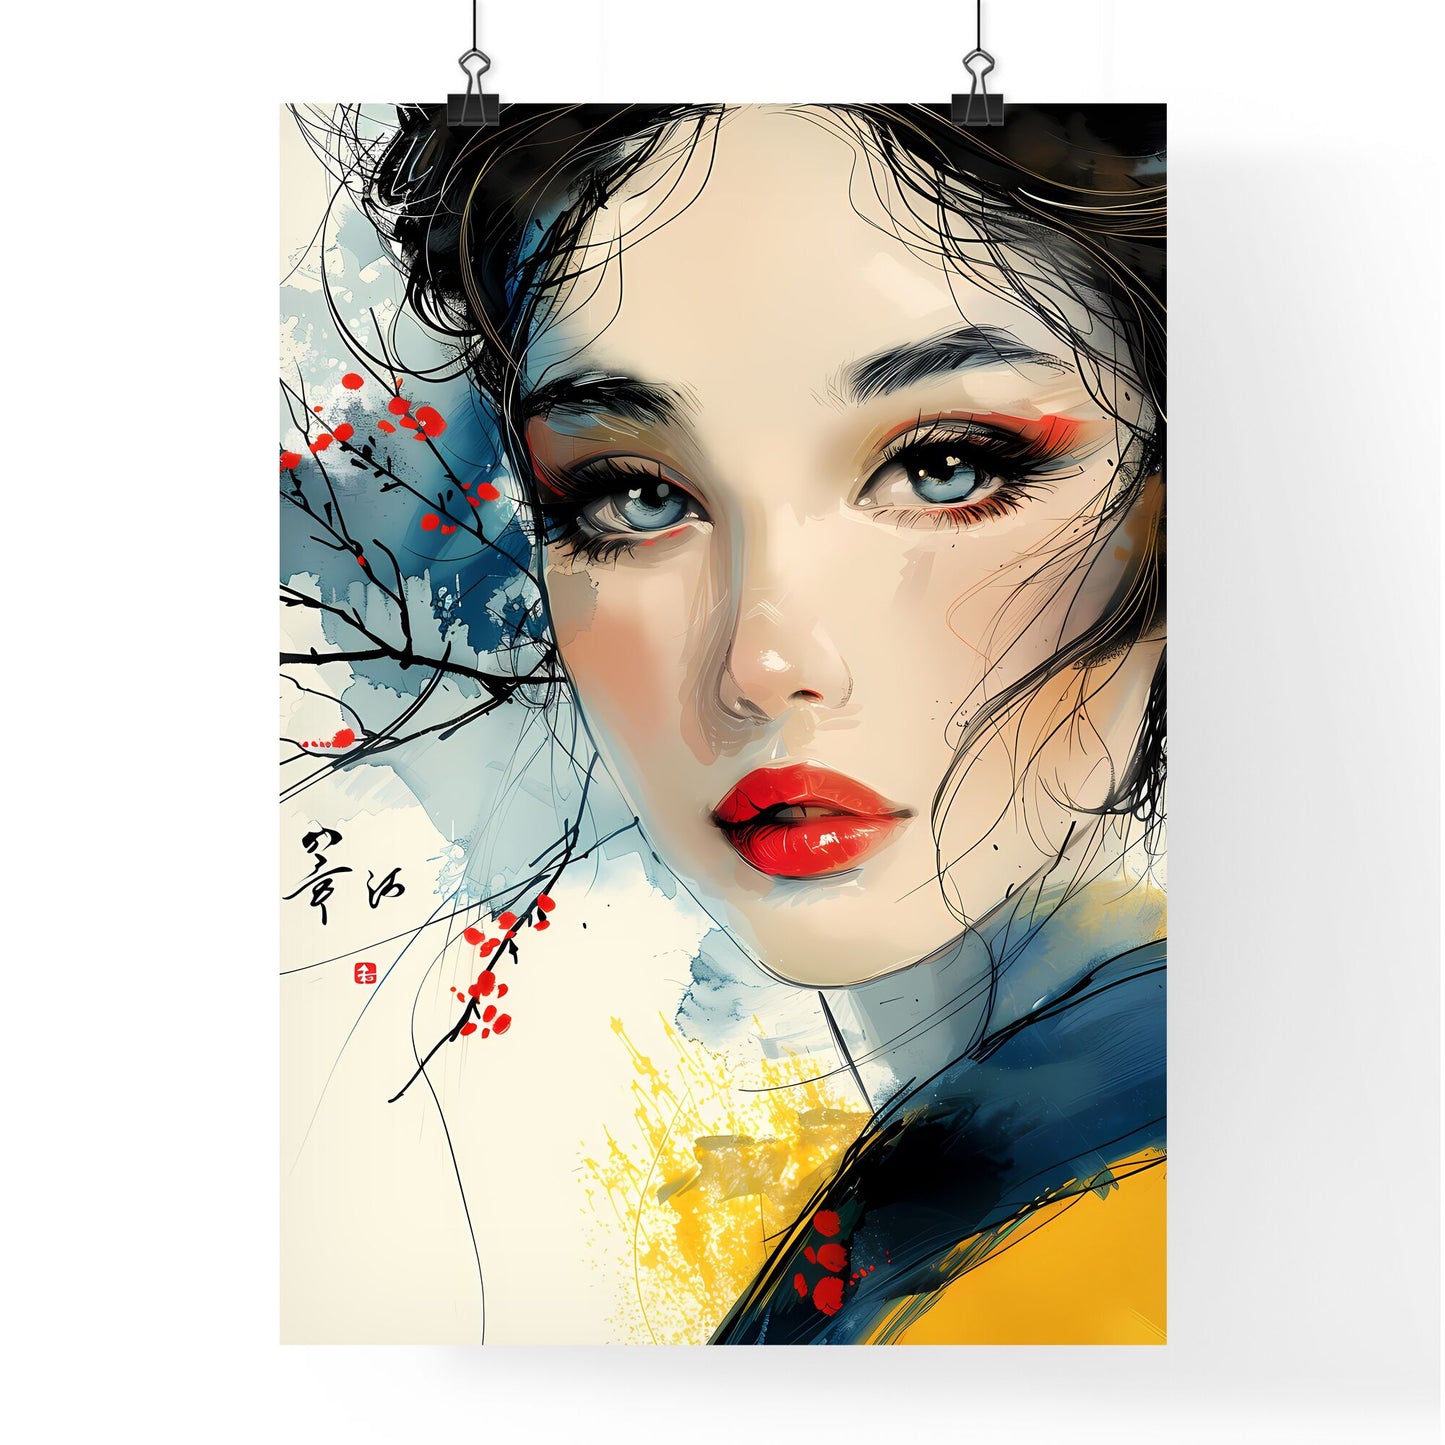 Seductive Feminine Orient-Style Painting With Blue Eyes, Red Lips, Delicate Lines and Vibrant Colors High Resolution Default Title